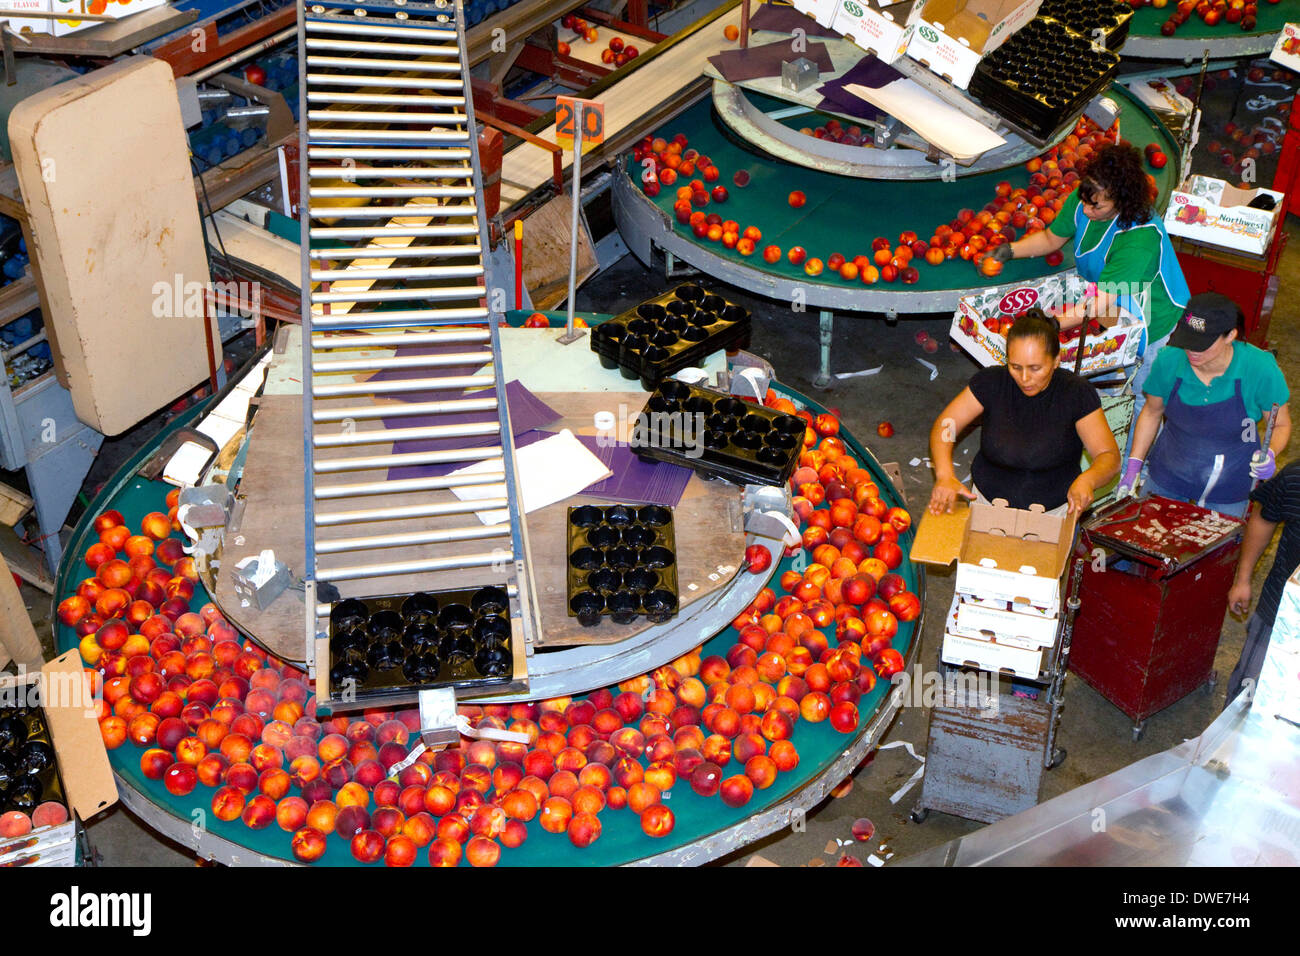 Workers sort peaches at the Symms Fruit Ranch packing facility near Sunny Slope, Idaho, USA. Stock Photo